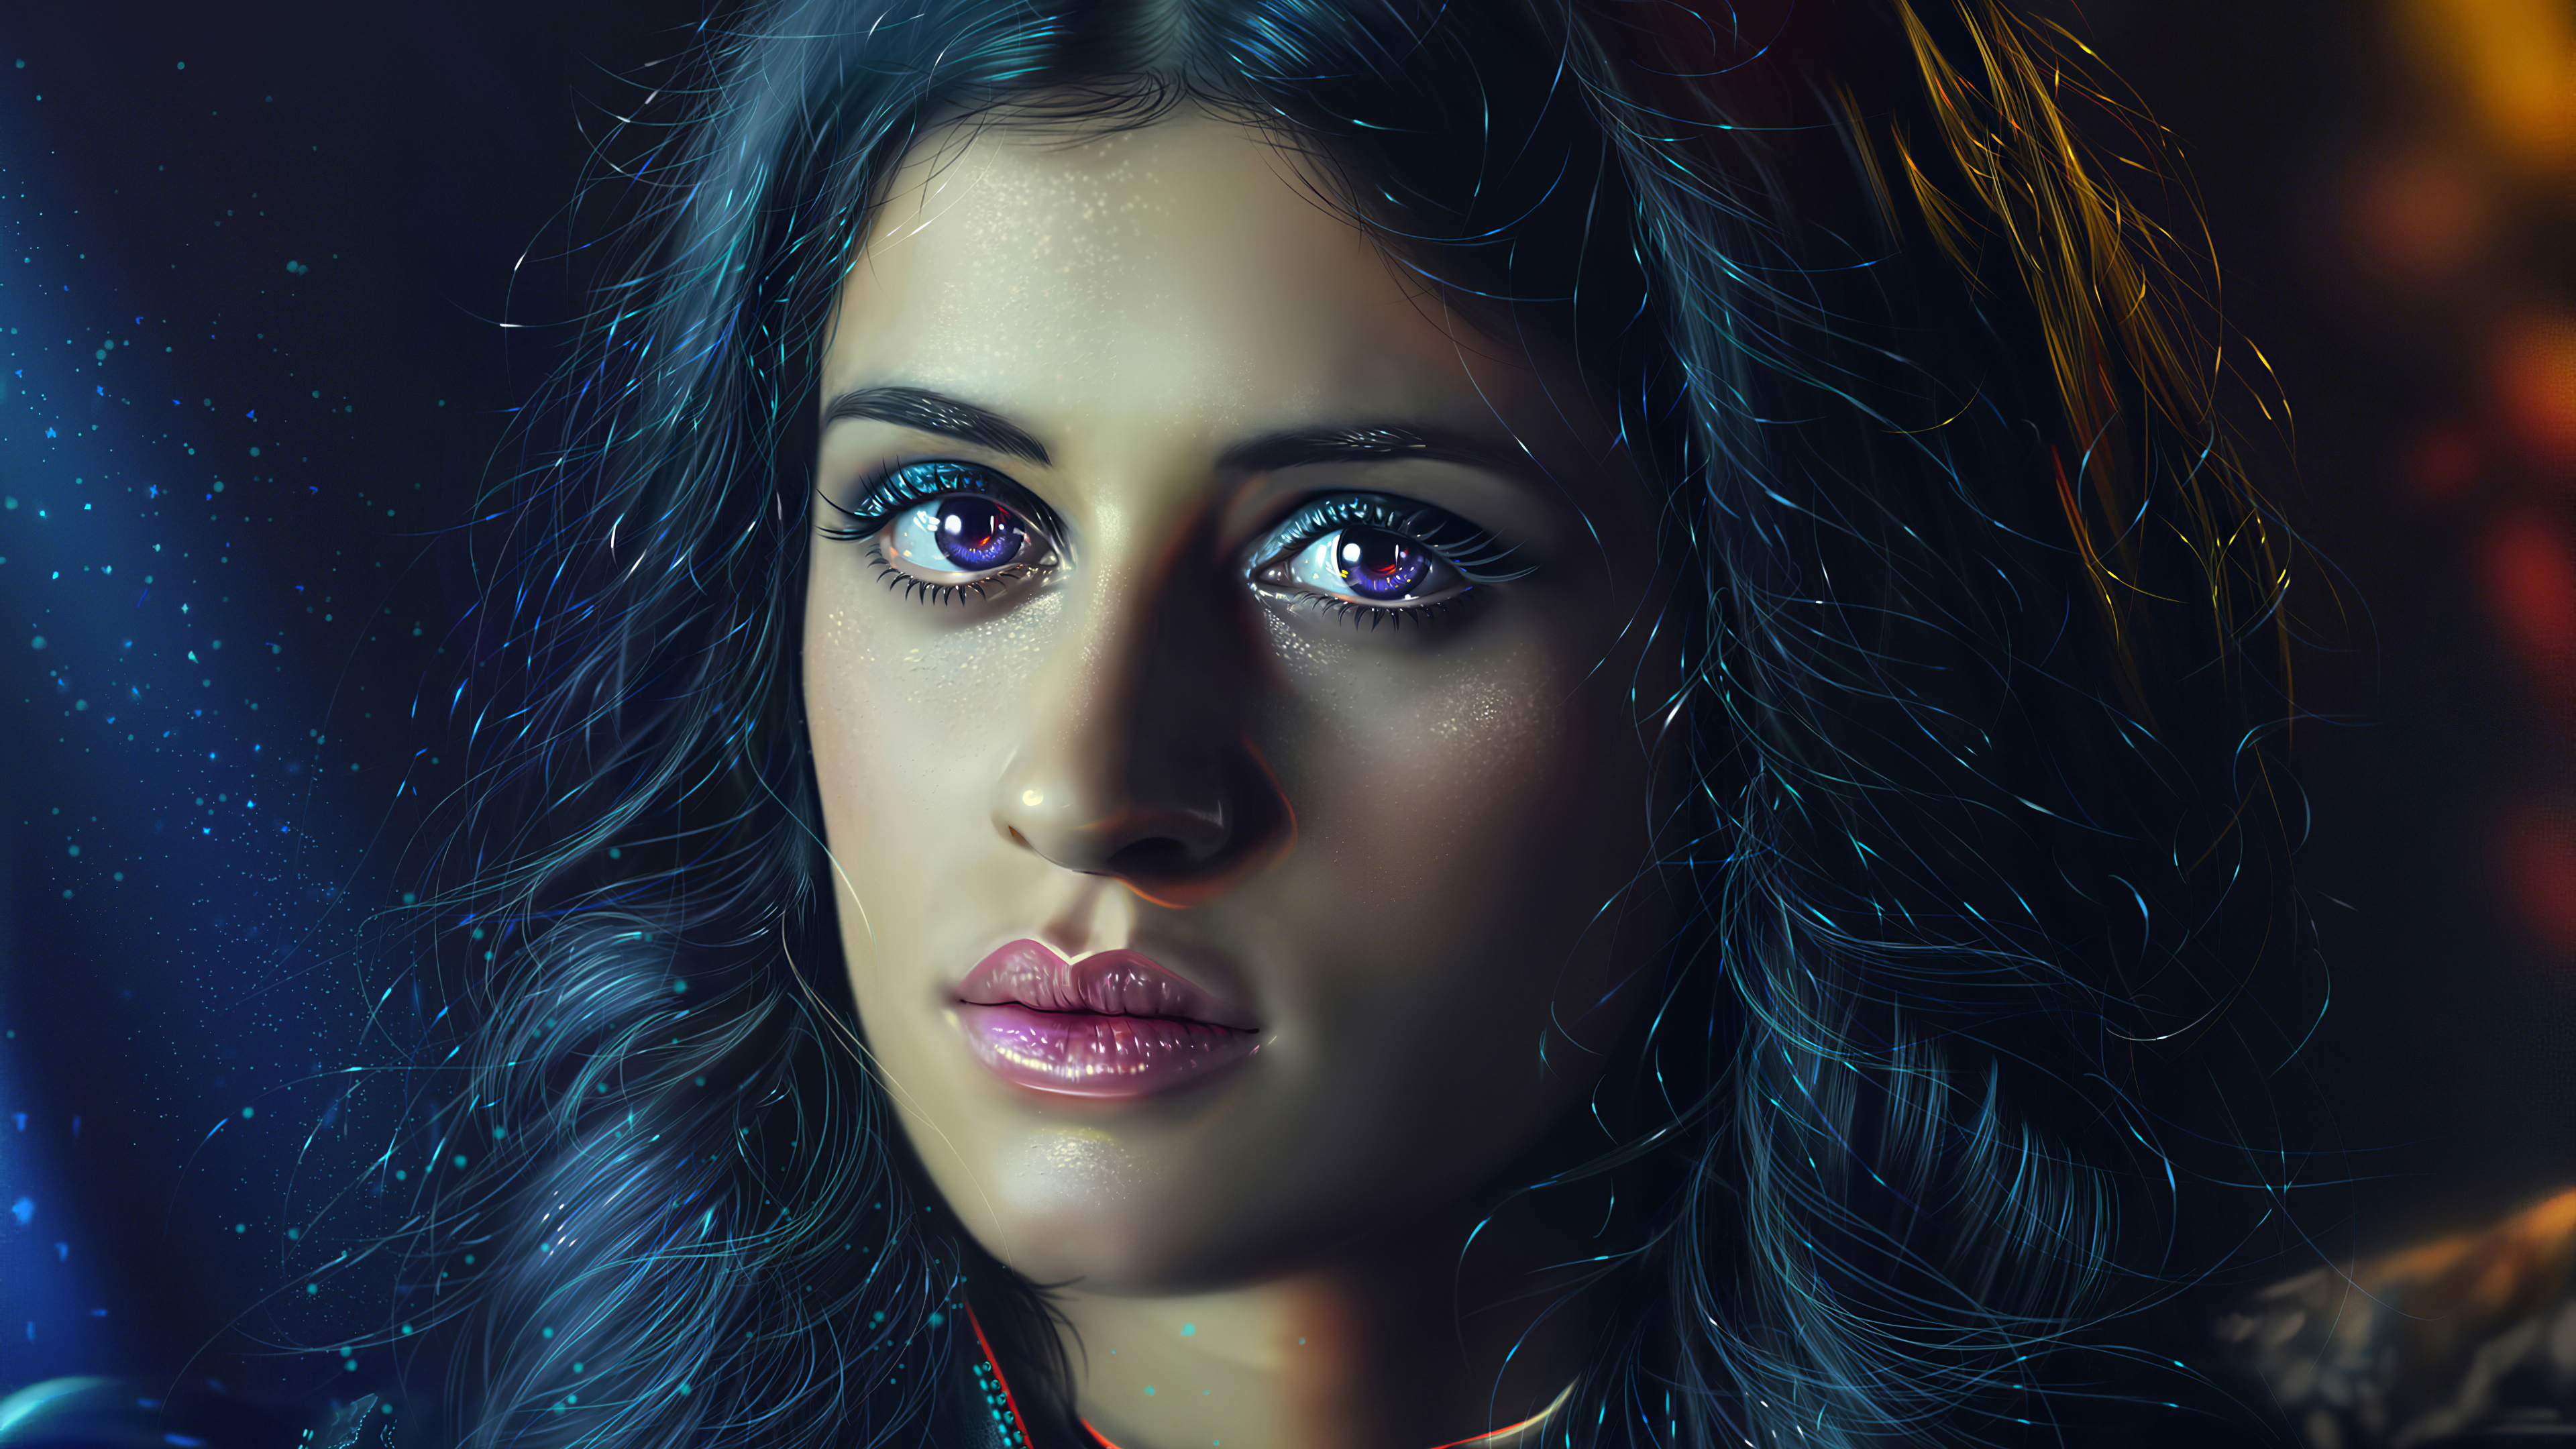 Anya Chalotra As Yennefer In The Witcher Wallpapers